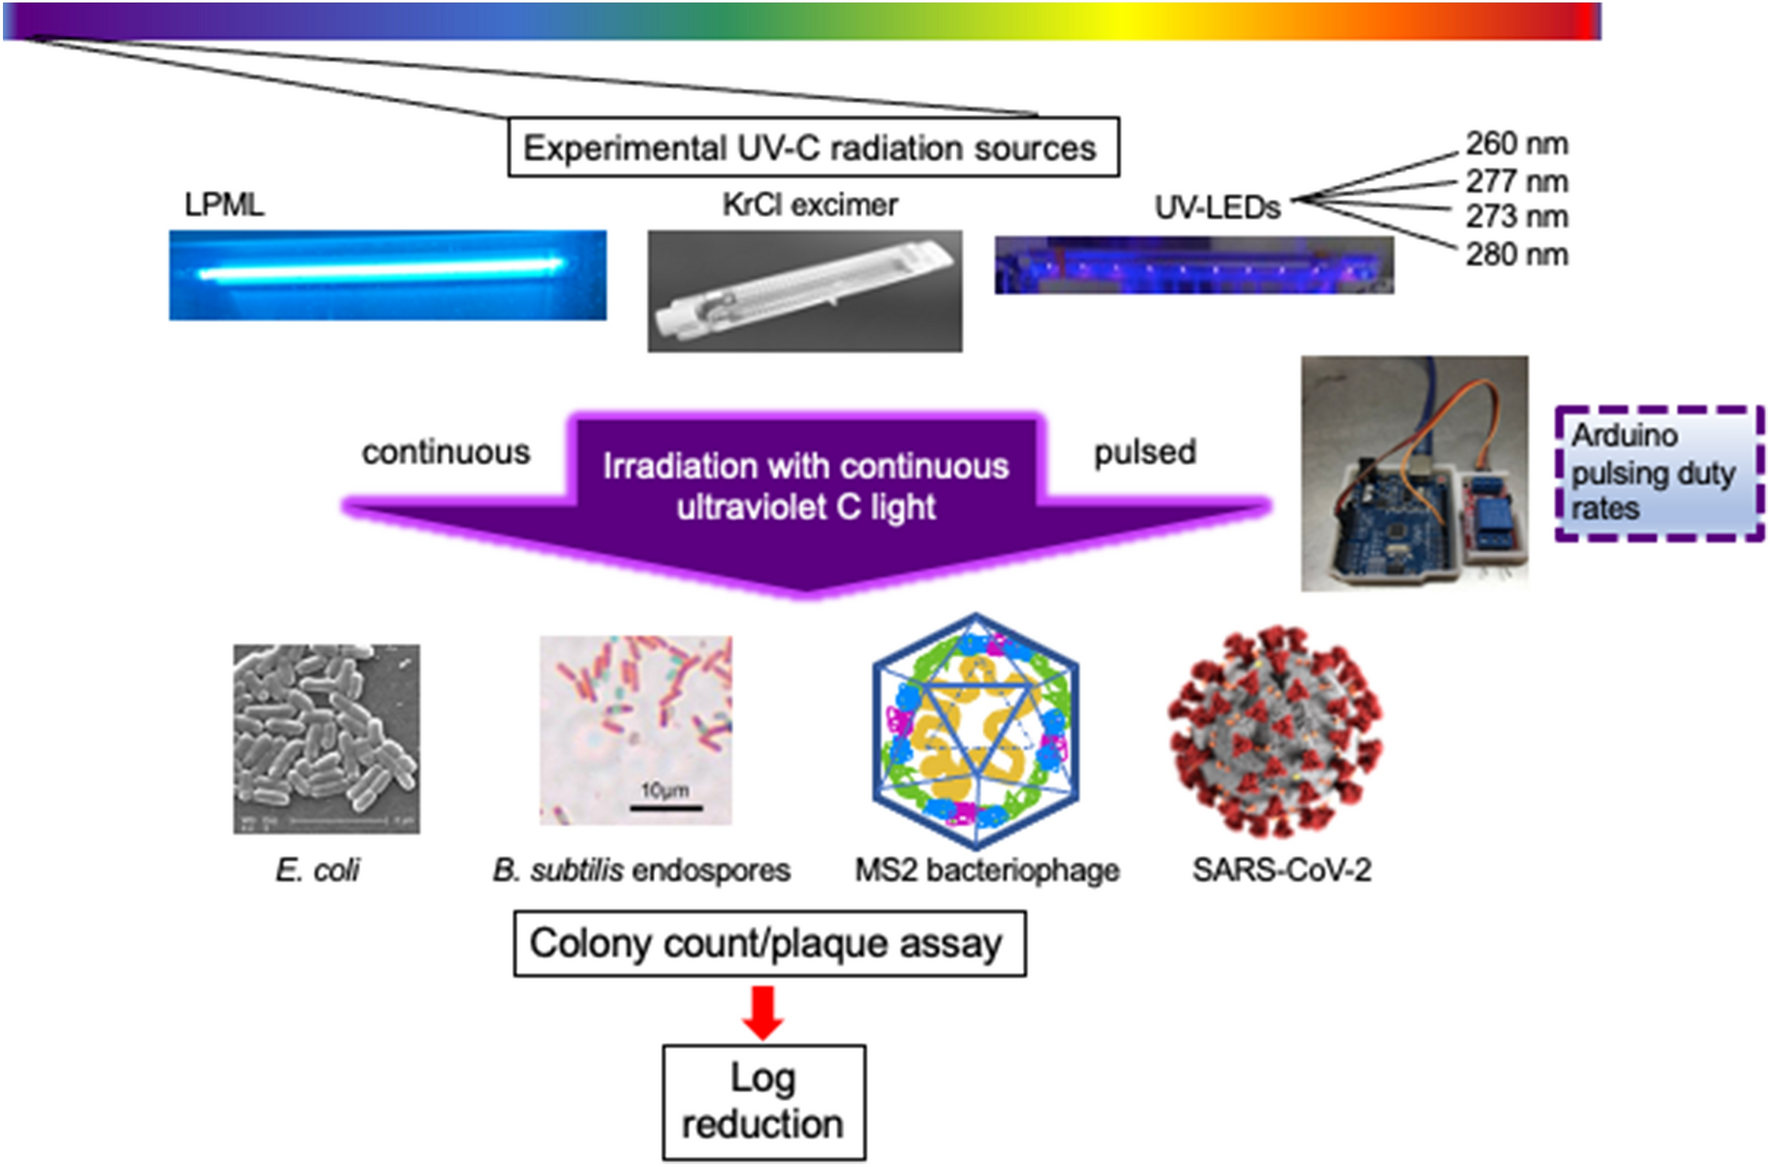 Germicidal efficacy of continuous and pulsed ultraviolet-C radiation on pathogen models and SARS-CoV-2